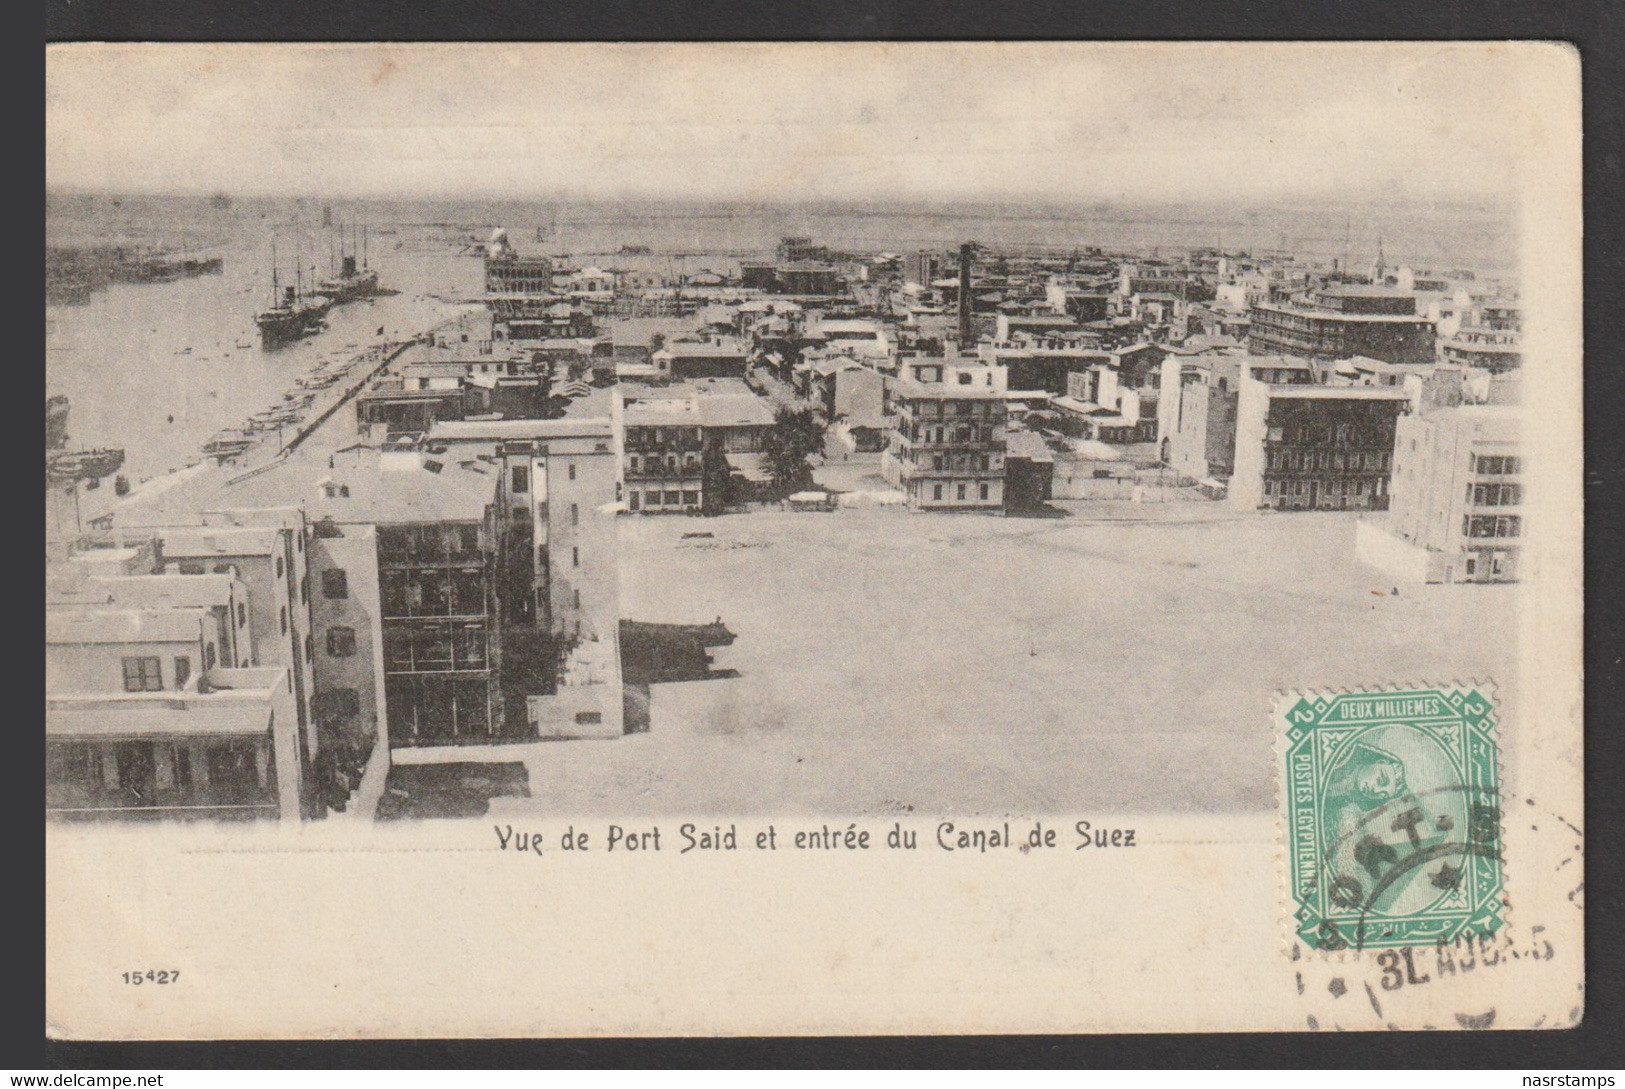 Egypt - Rare - Vintage Post Card - View Of Port Said And Entrance To The Suez Canal - 1866-1914 Khedivate Of Egypt